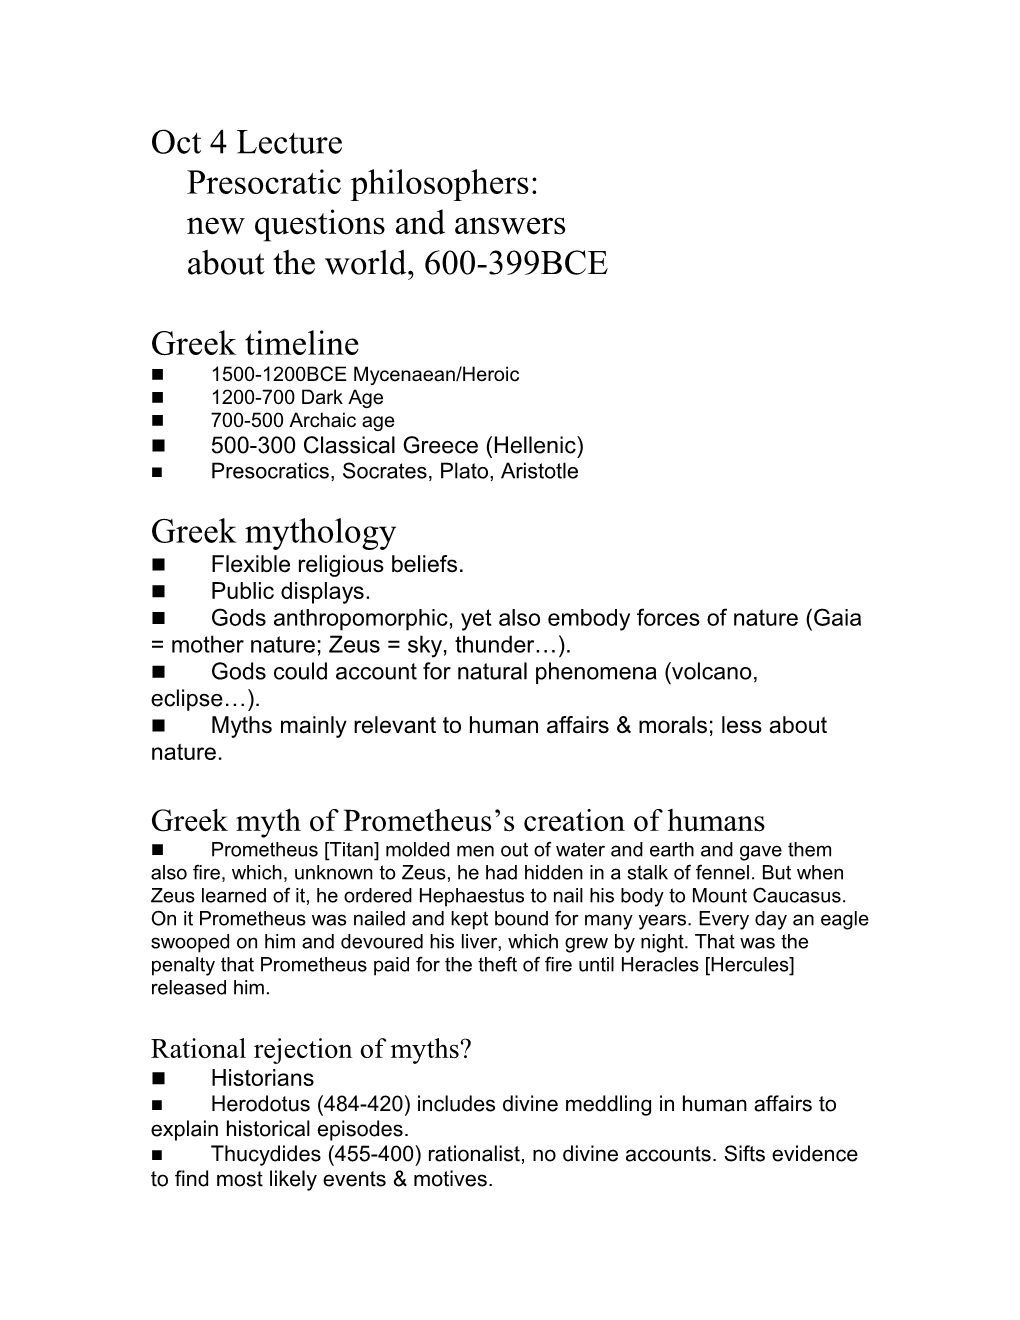 Oct 4 Lecturepresocratic Philosophers: New Questions and Answers About the World, 600-399BCE